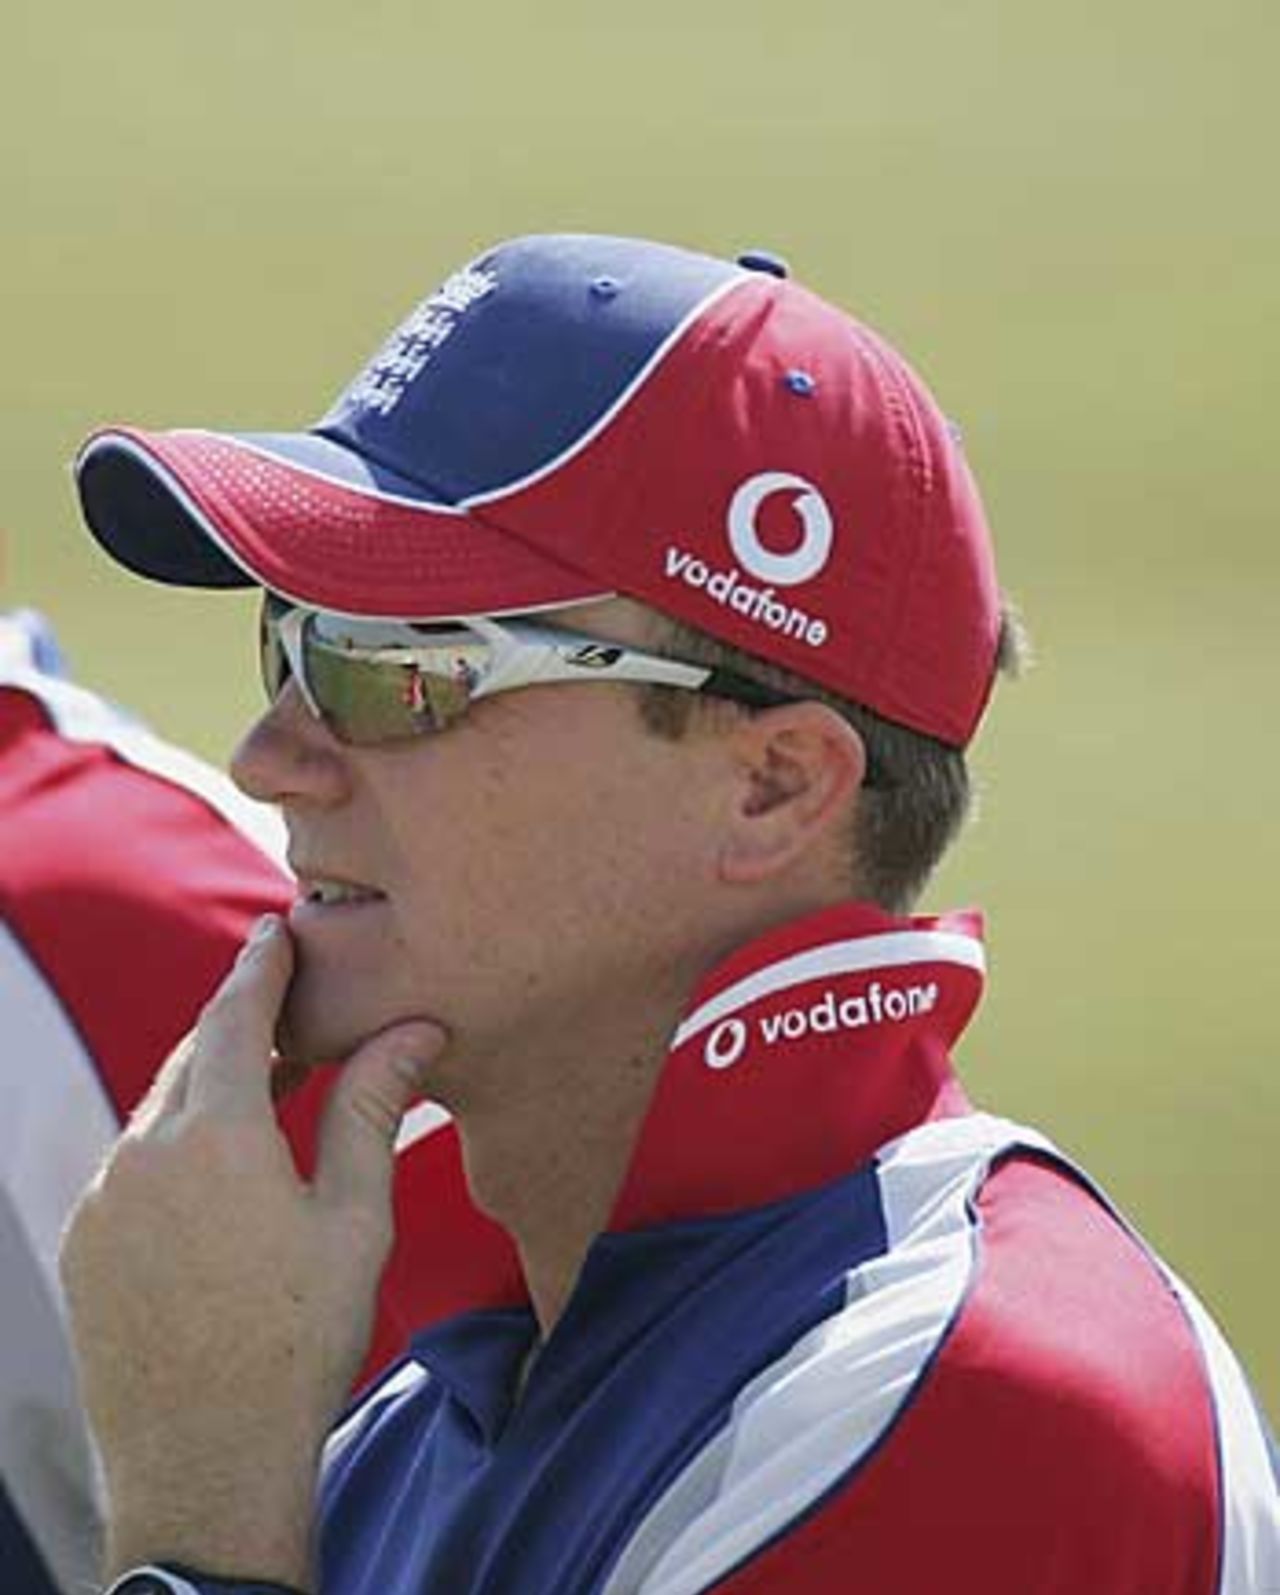 Shaun Udal watches on during a training session, Islamabad, October 27, 2005